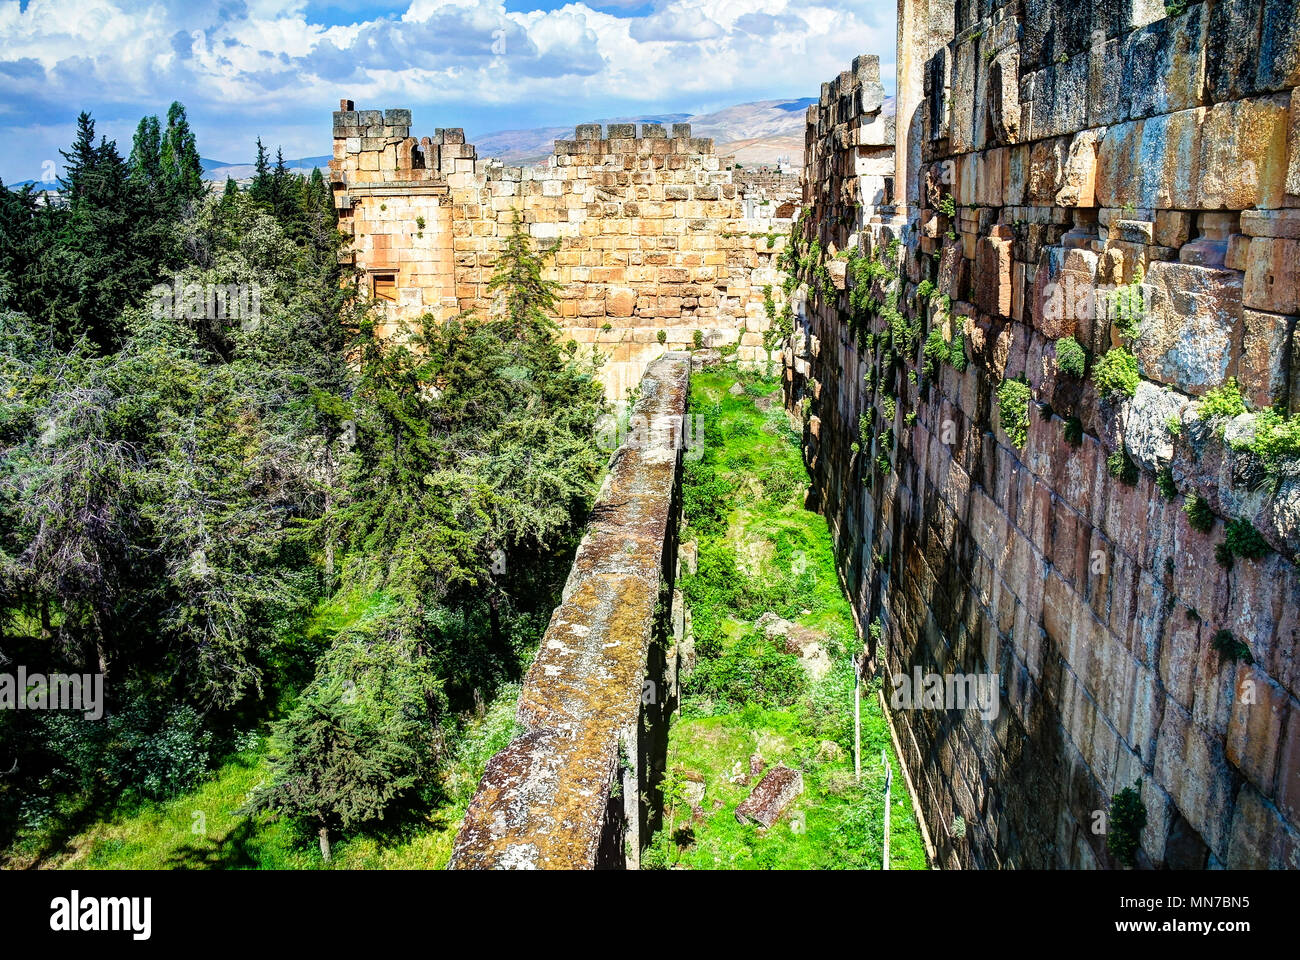 Ruins of wall of great court of Heliopolis and trilithons , Baalbek at Bekaa valley Lebanon Stock Photo